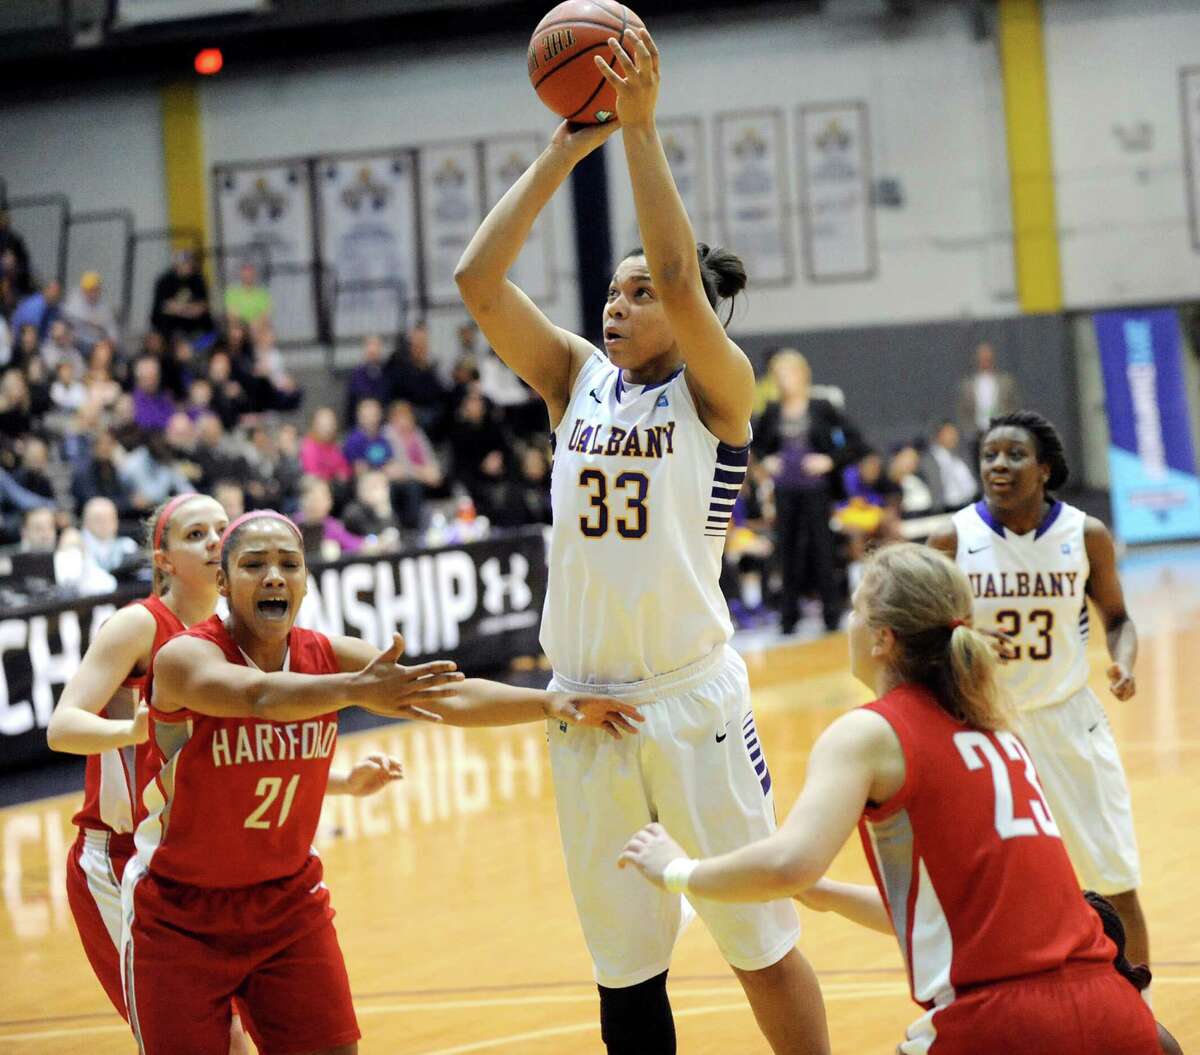 UAlbany's Tiana-Jo Carter, center, goes to the hoop during their America East Championship game against Hartford on Friday, March 13, 2015, at UAlbany in Albany, N.Y. (Cindy Schultz / Times Union)